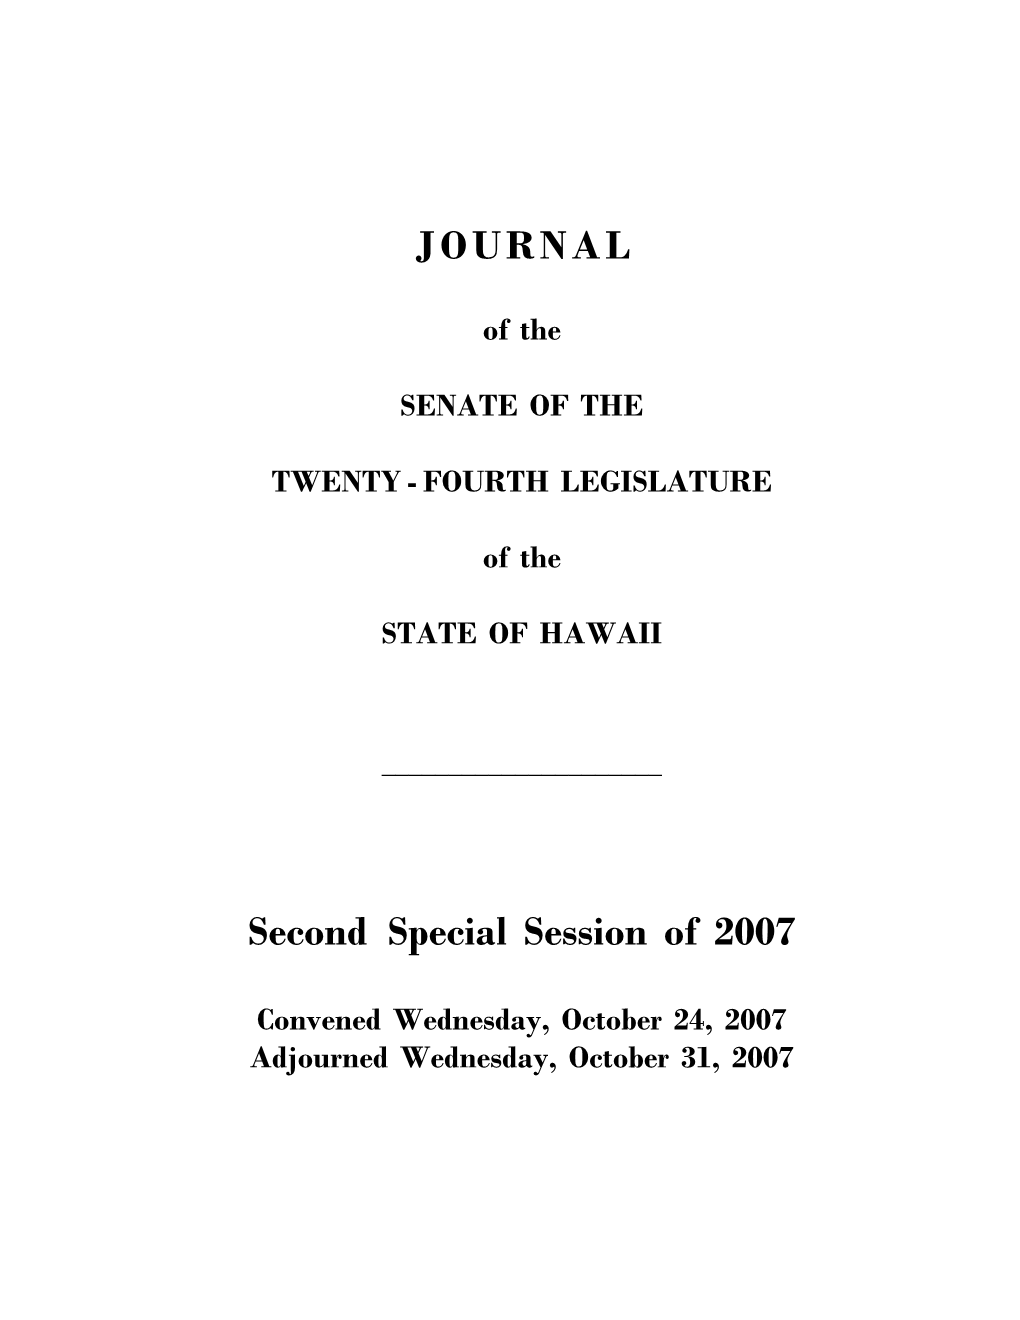 JOURNAL Second Special Session of 2007